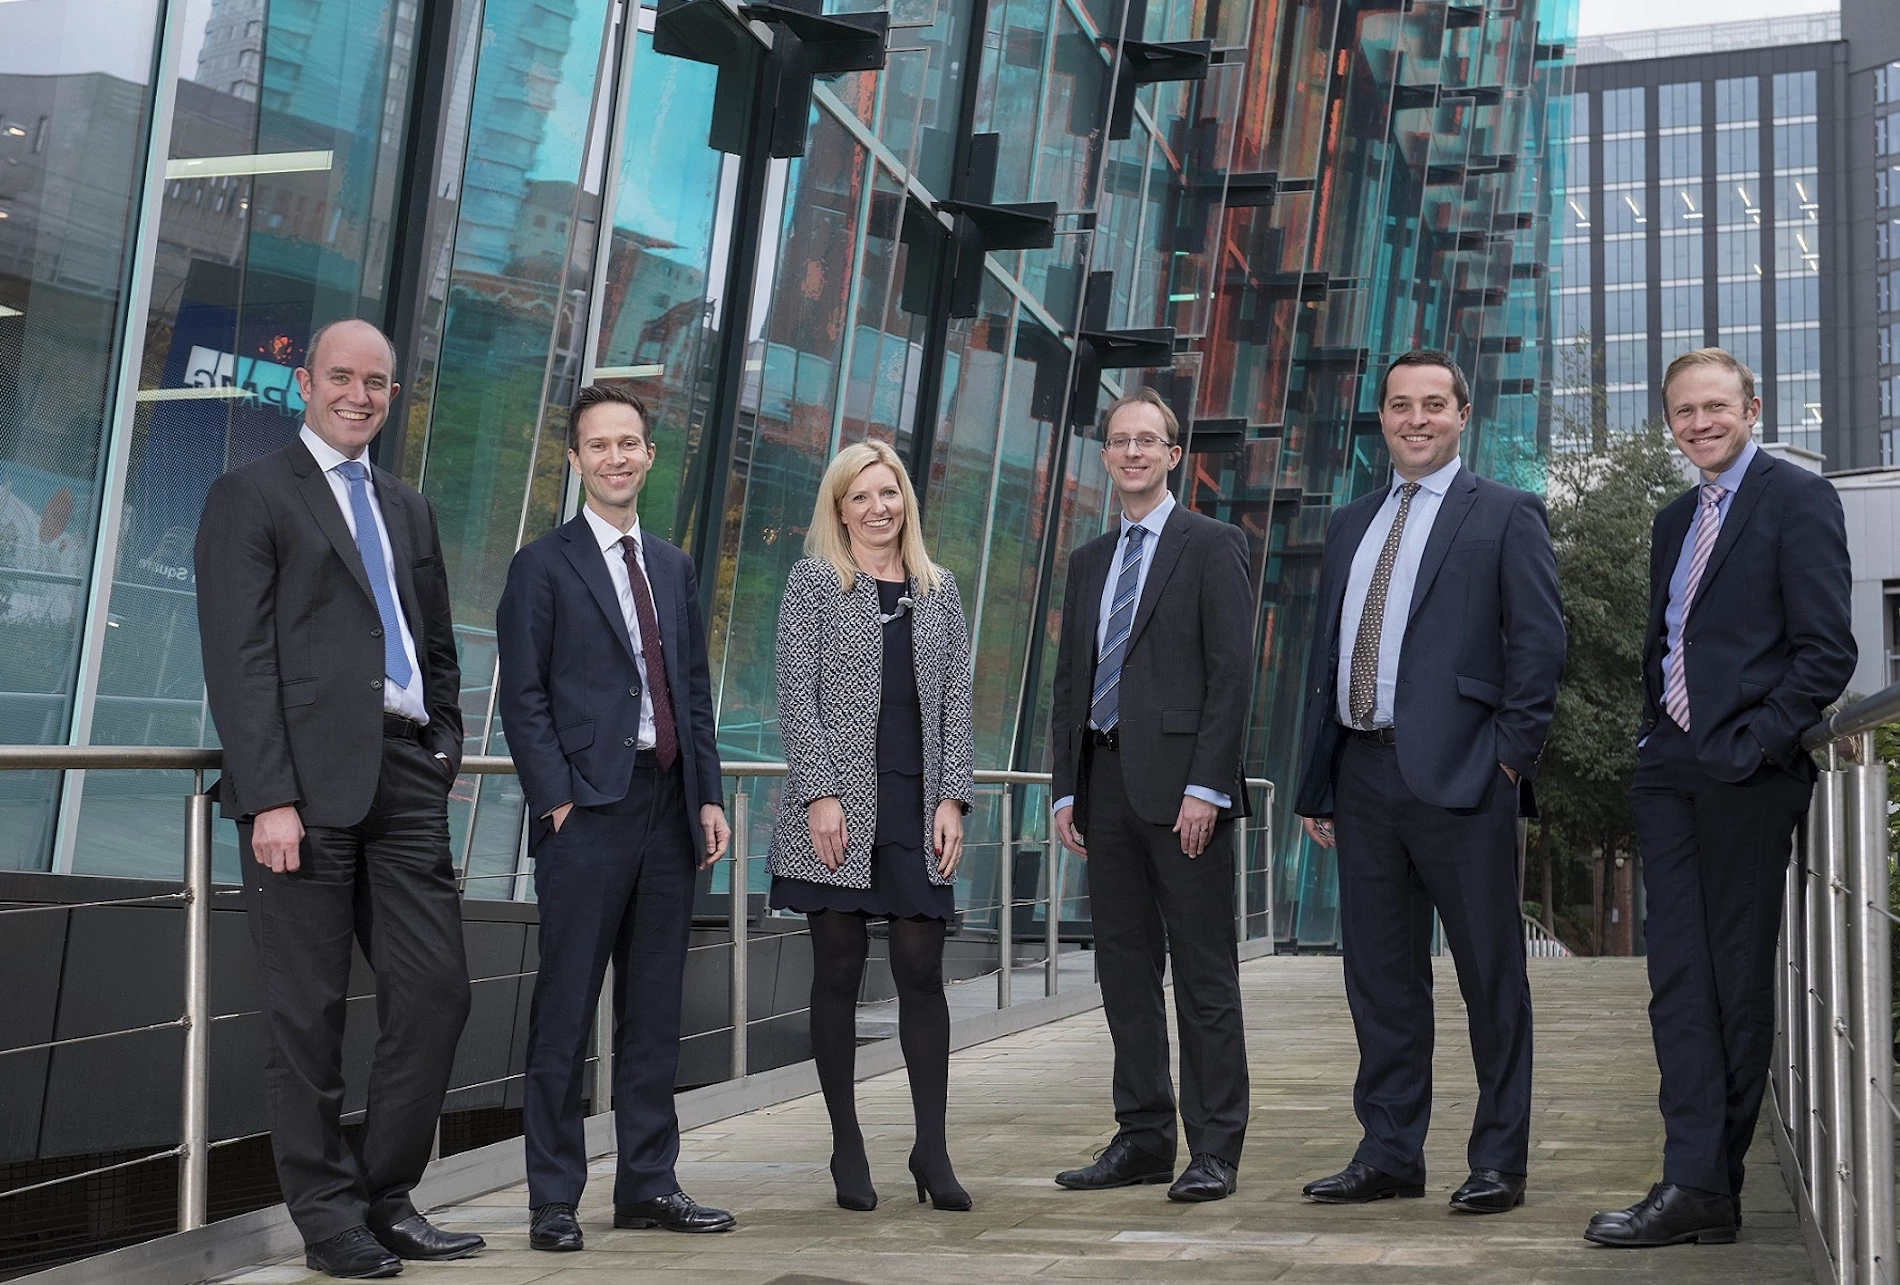 Chris Roberts, Phil Murden, Claire Gallimore, Michael Davidson, Oliver Duckett and Rob Wilson; new partners and directors at KPMG in Leeds.